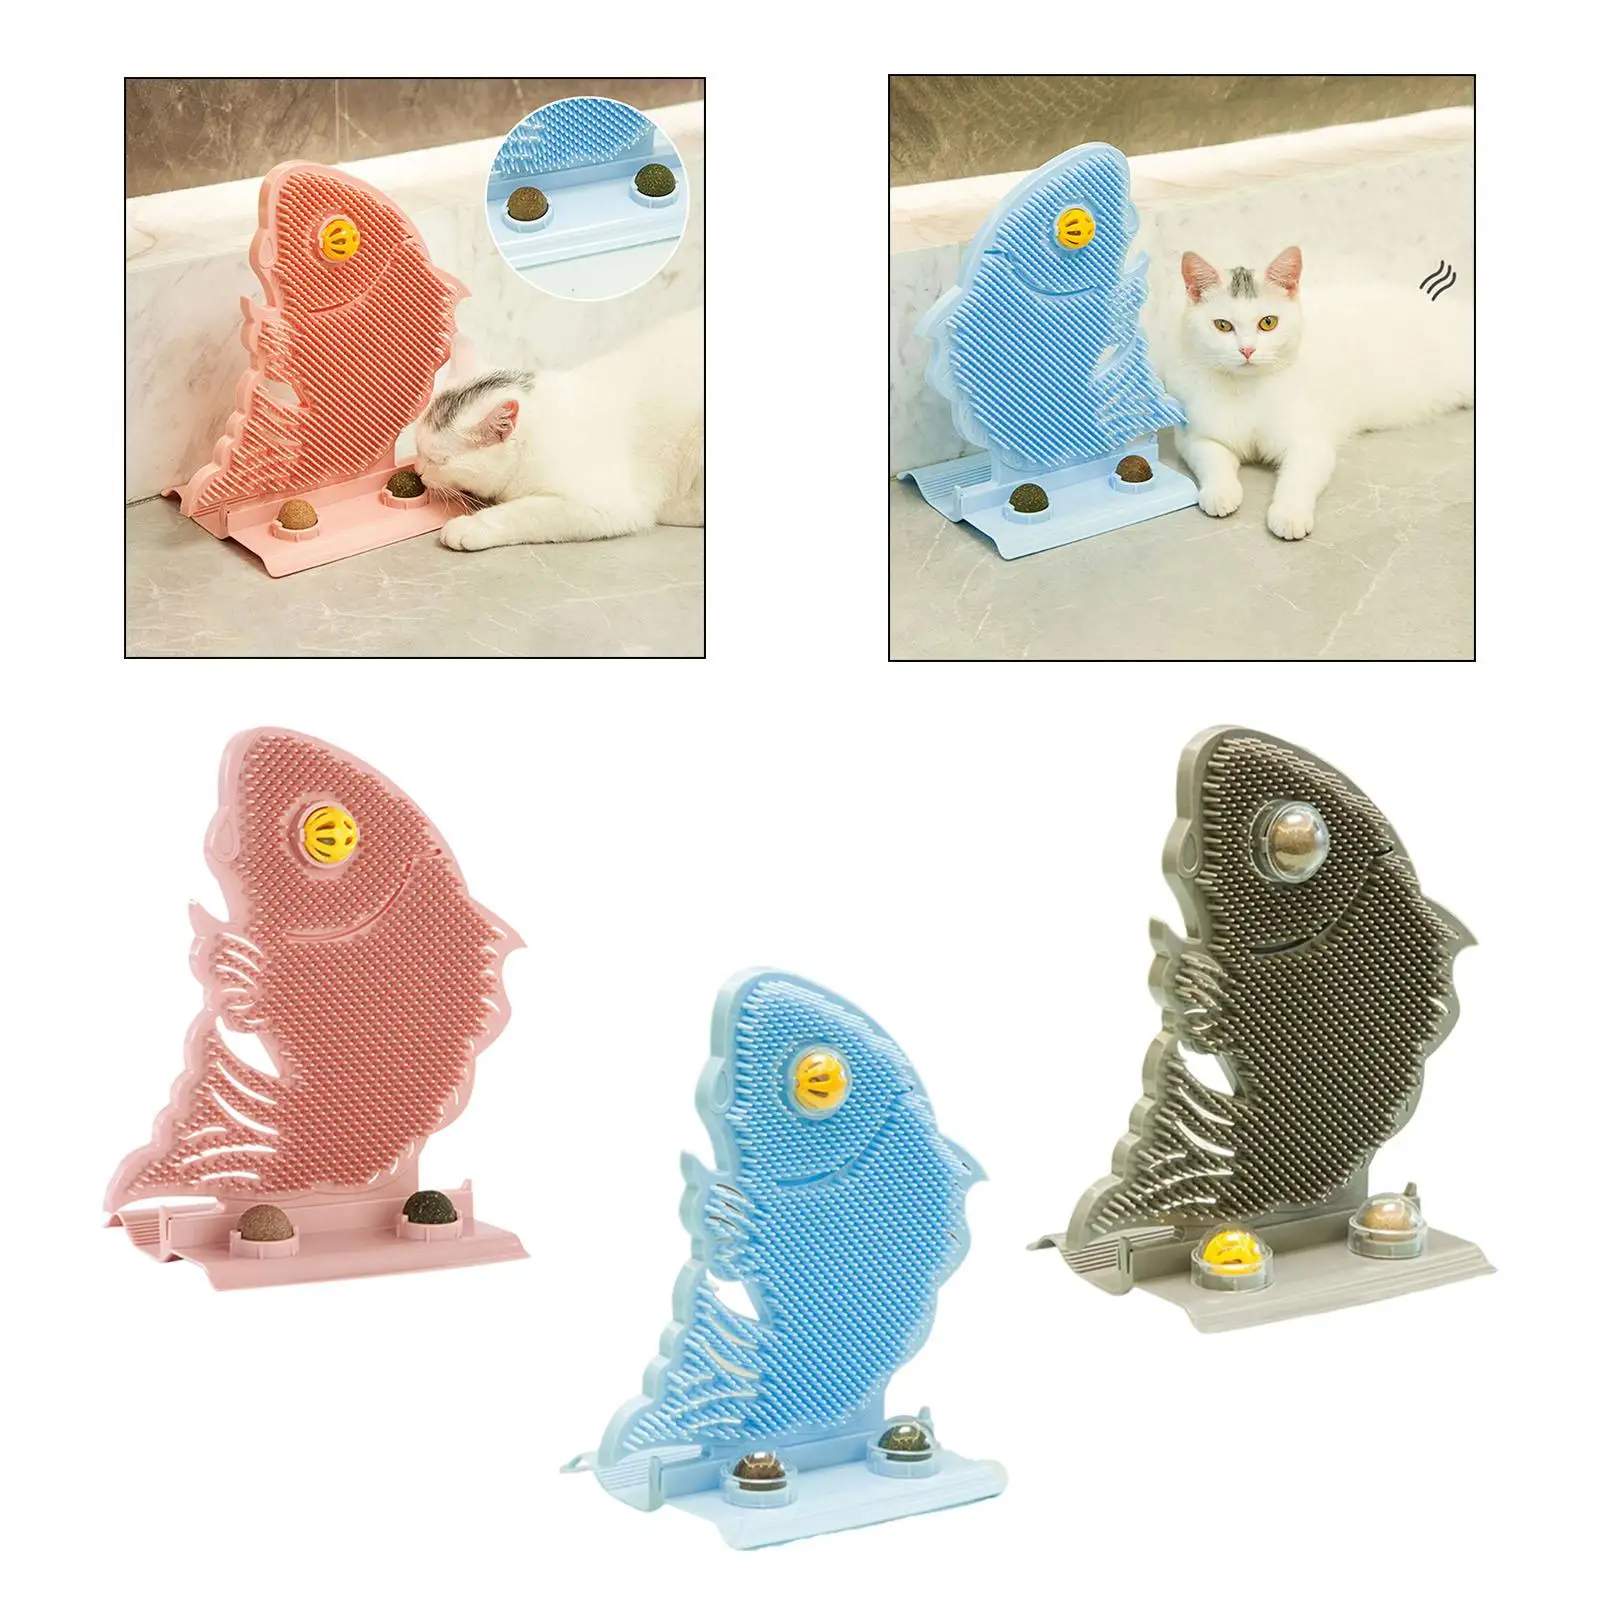 Cute Fish Shaped Groomer with Catnip and Bell Toy Massage Comb Grooming Brush Tool for Cats Haired Kitten